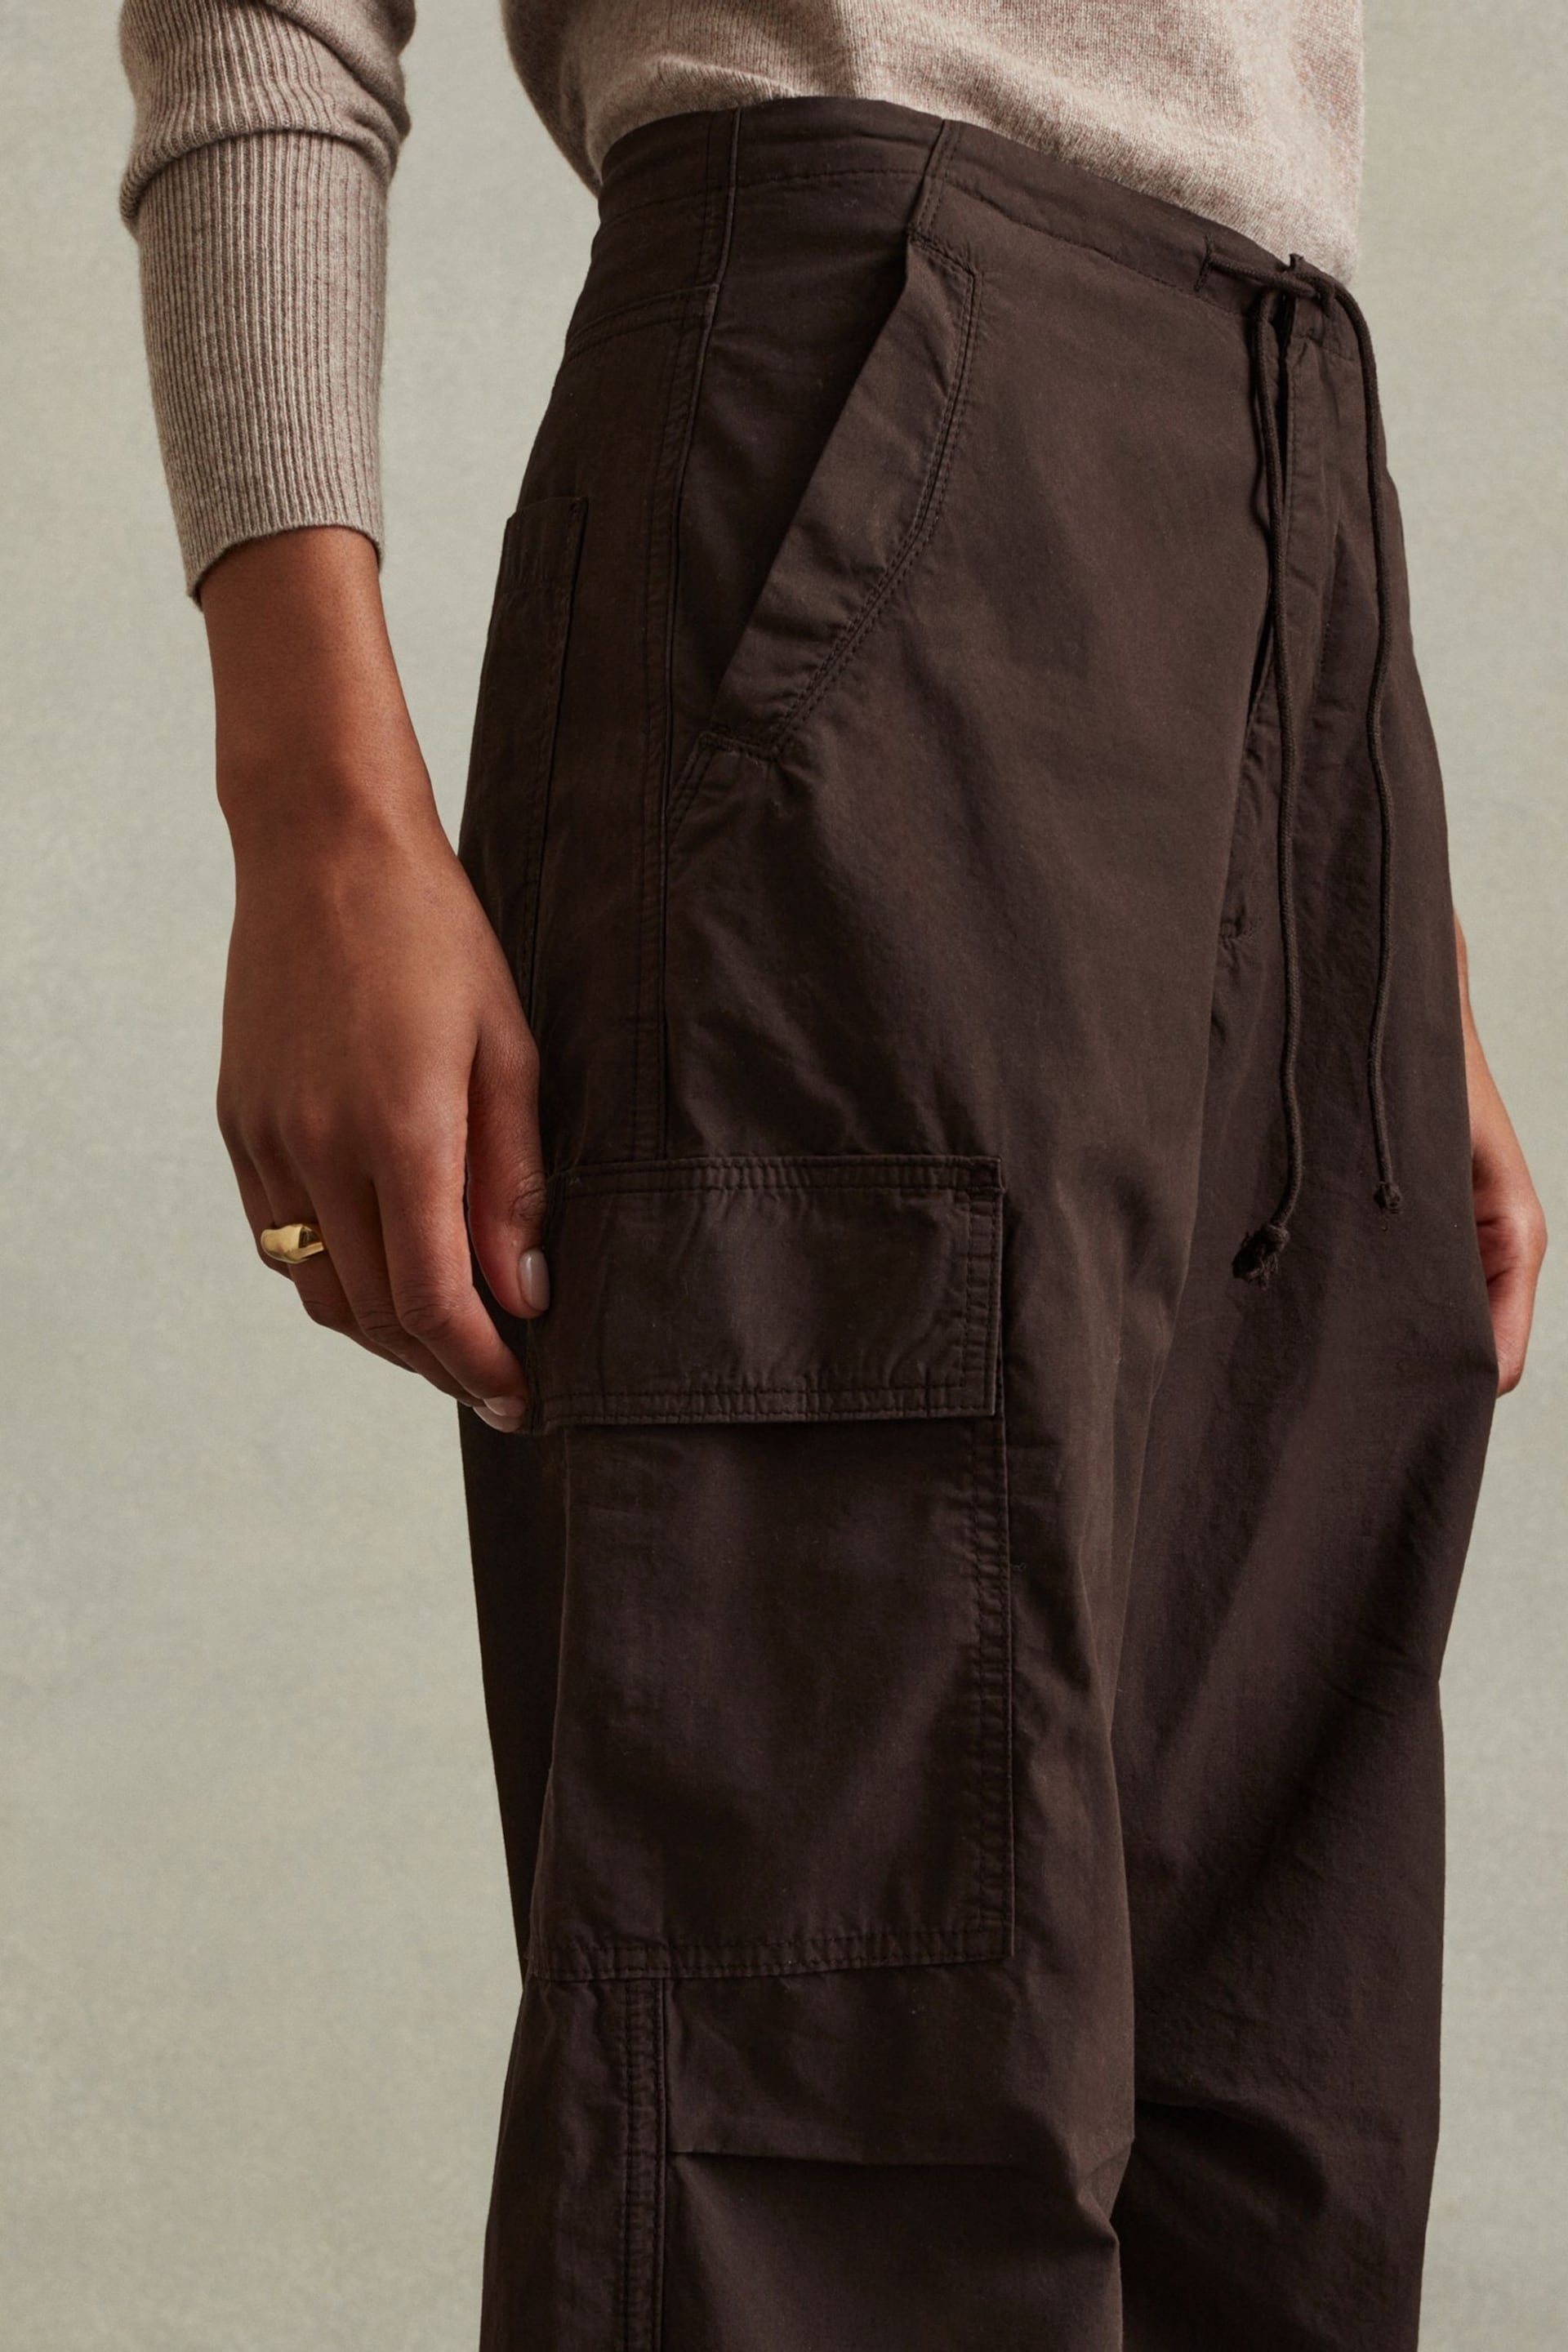 Reiss Chocolate Alessio Tapered Drawstring Cotton Combat Trousers - Image 3 of 6